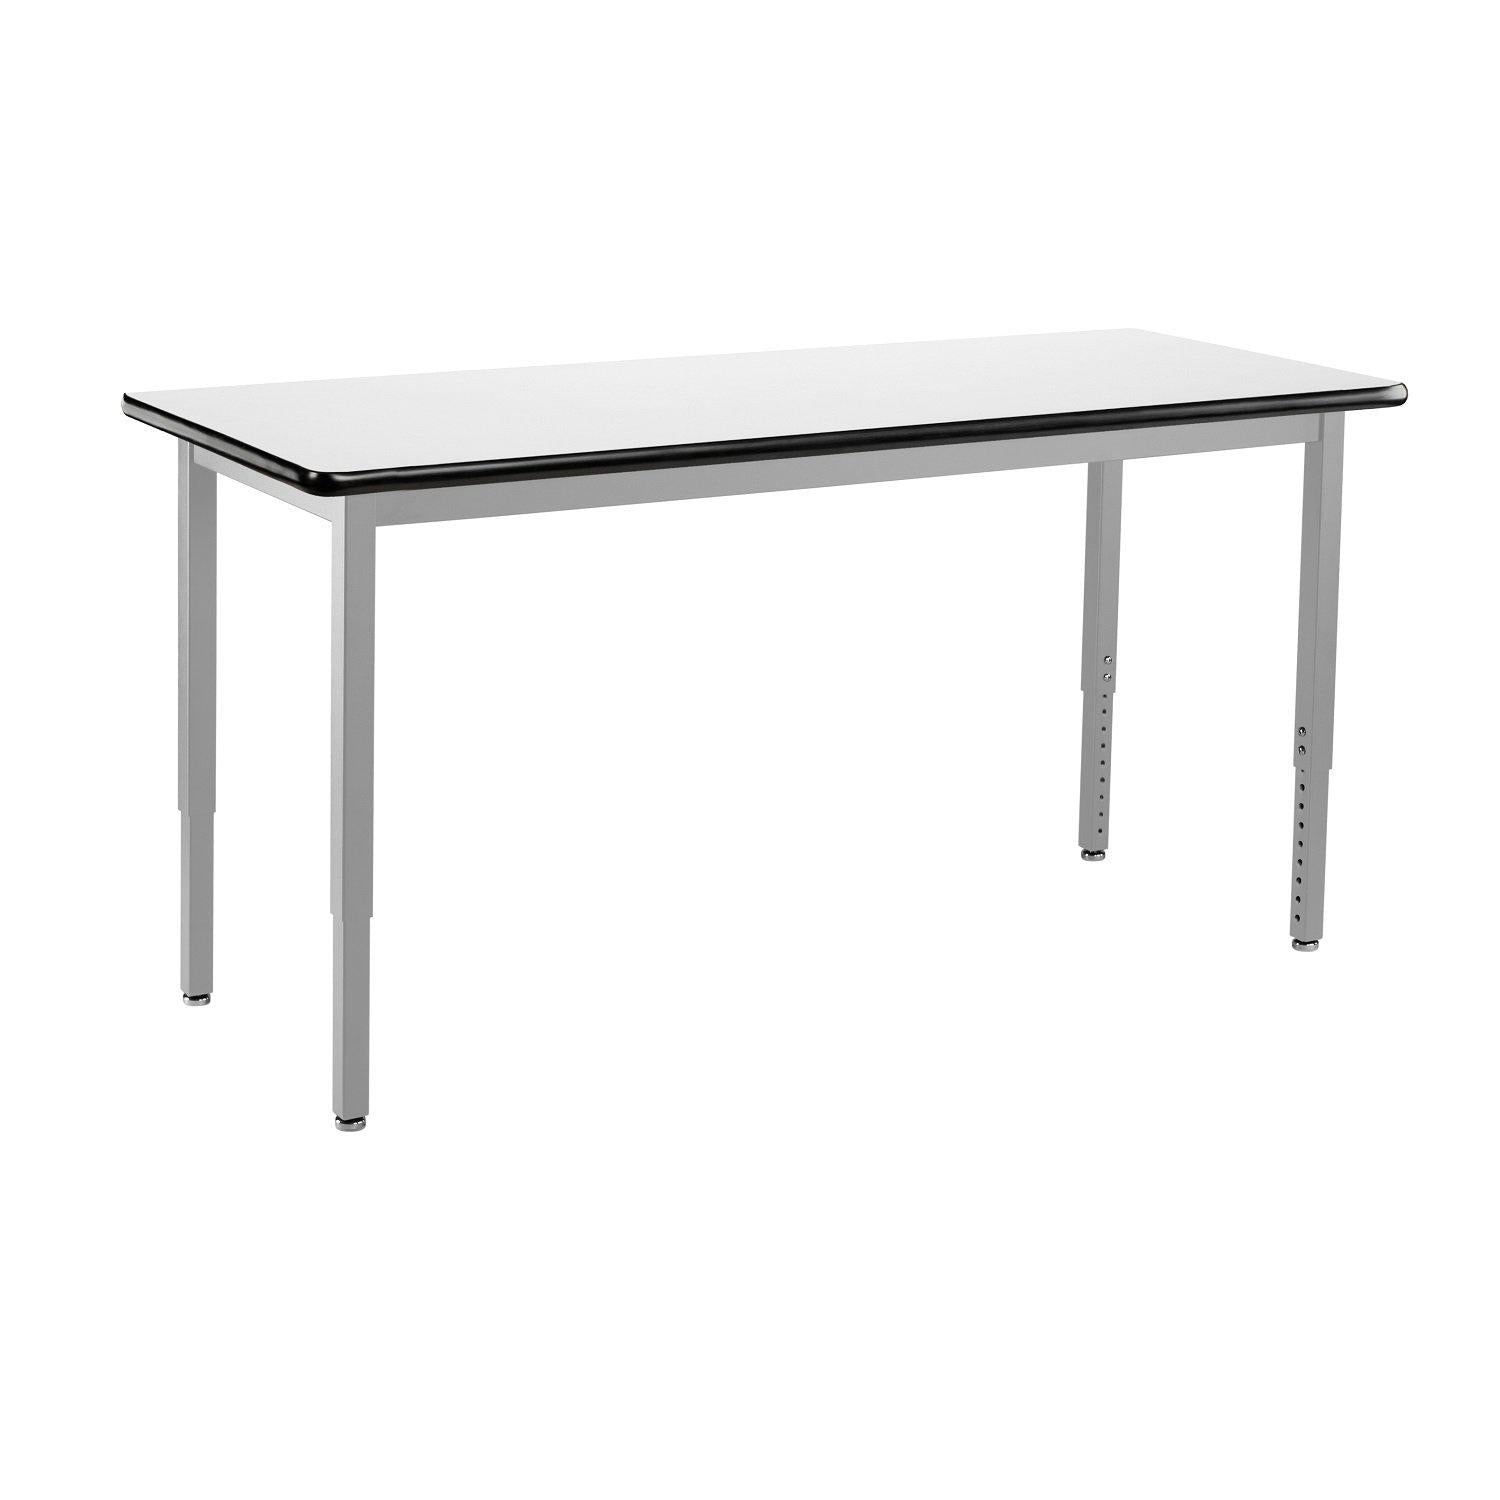 Heavy-Duty Height-Adjustable Utility Table, Soft Grey Frame, 30" x 60", Whiteboard High-Pressure Laminate Top